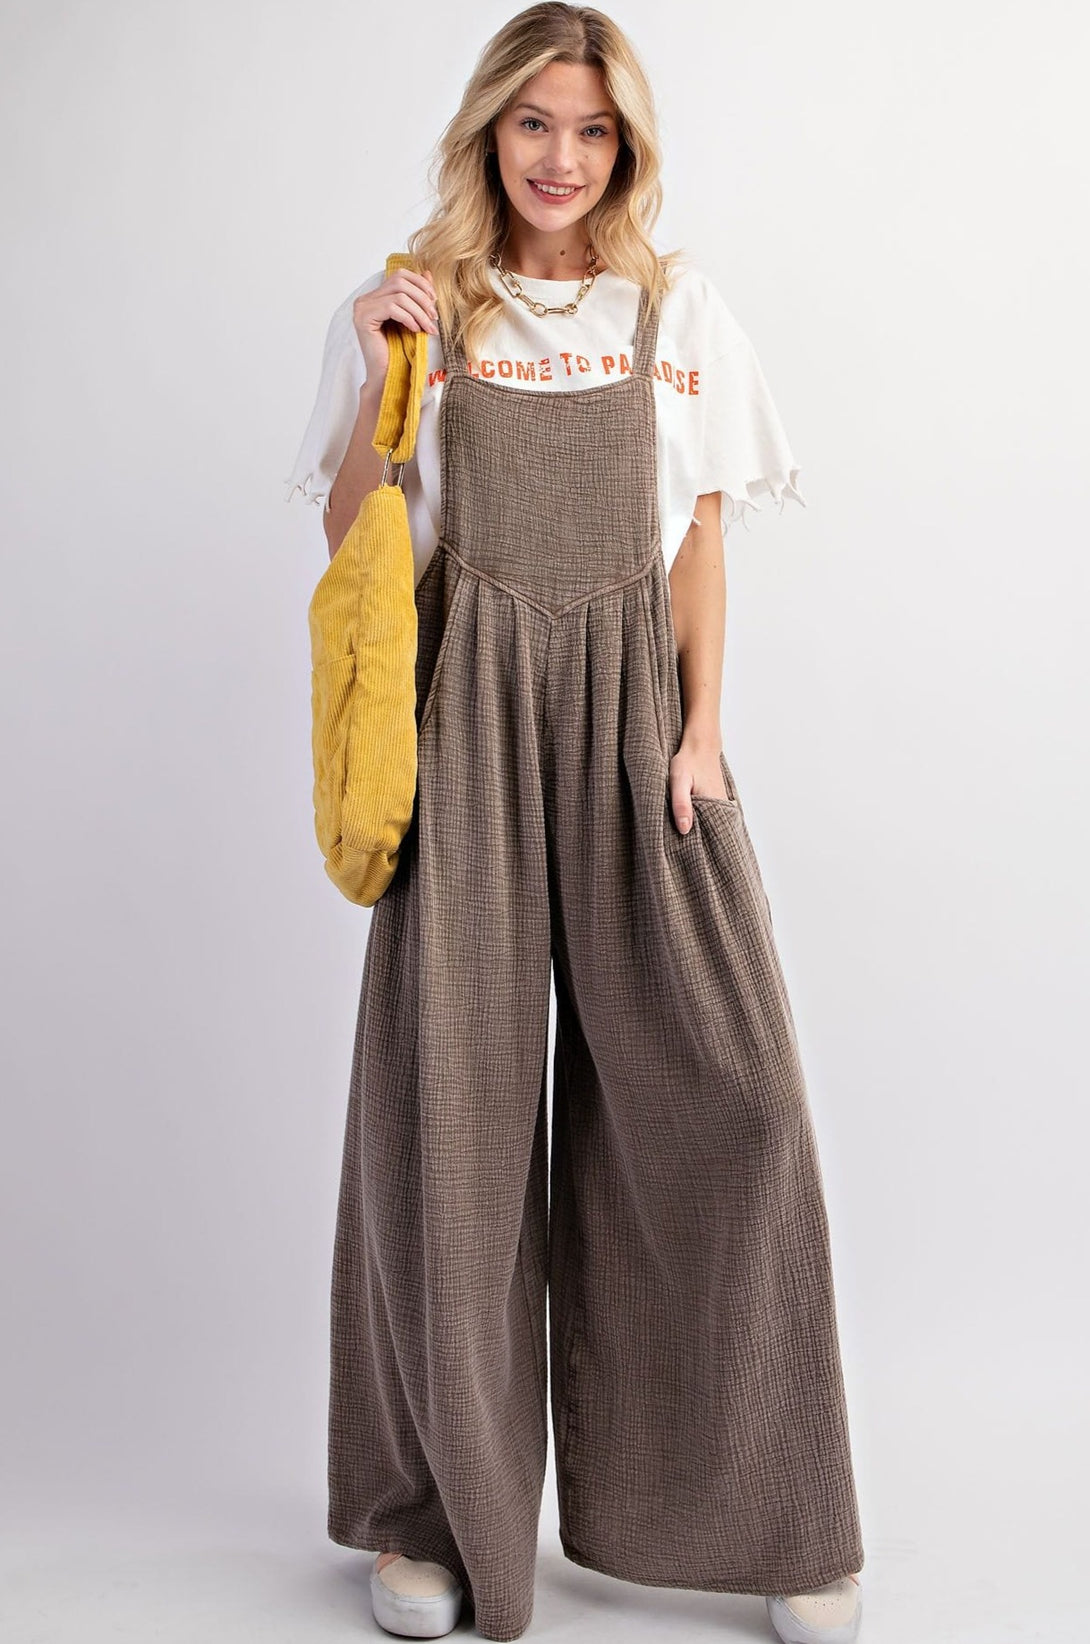 Mineral Washed Cotton Gauze Palazzo Jumpsuit